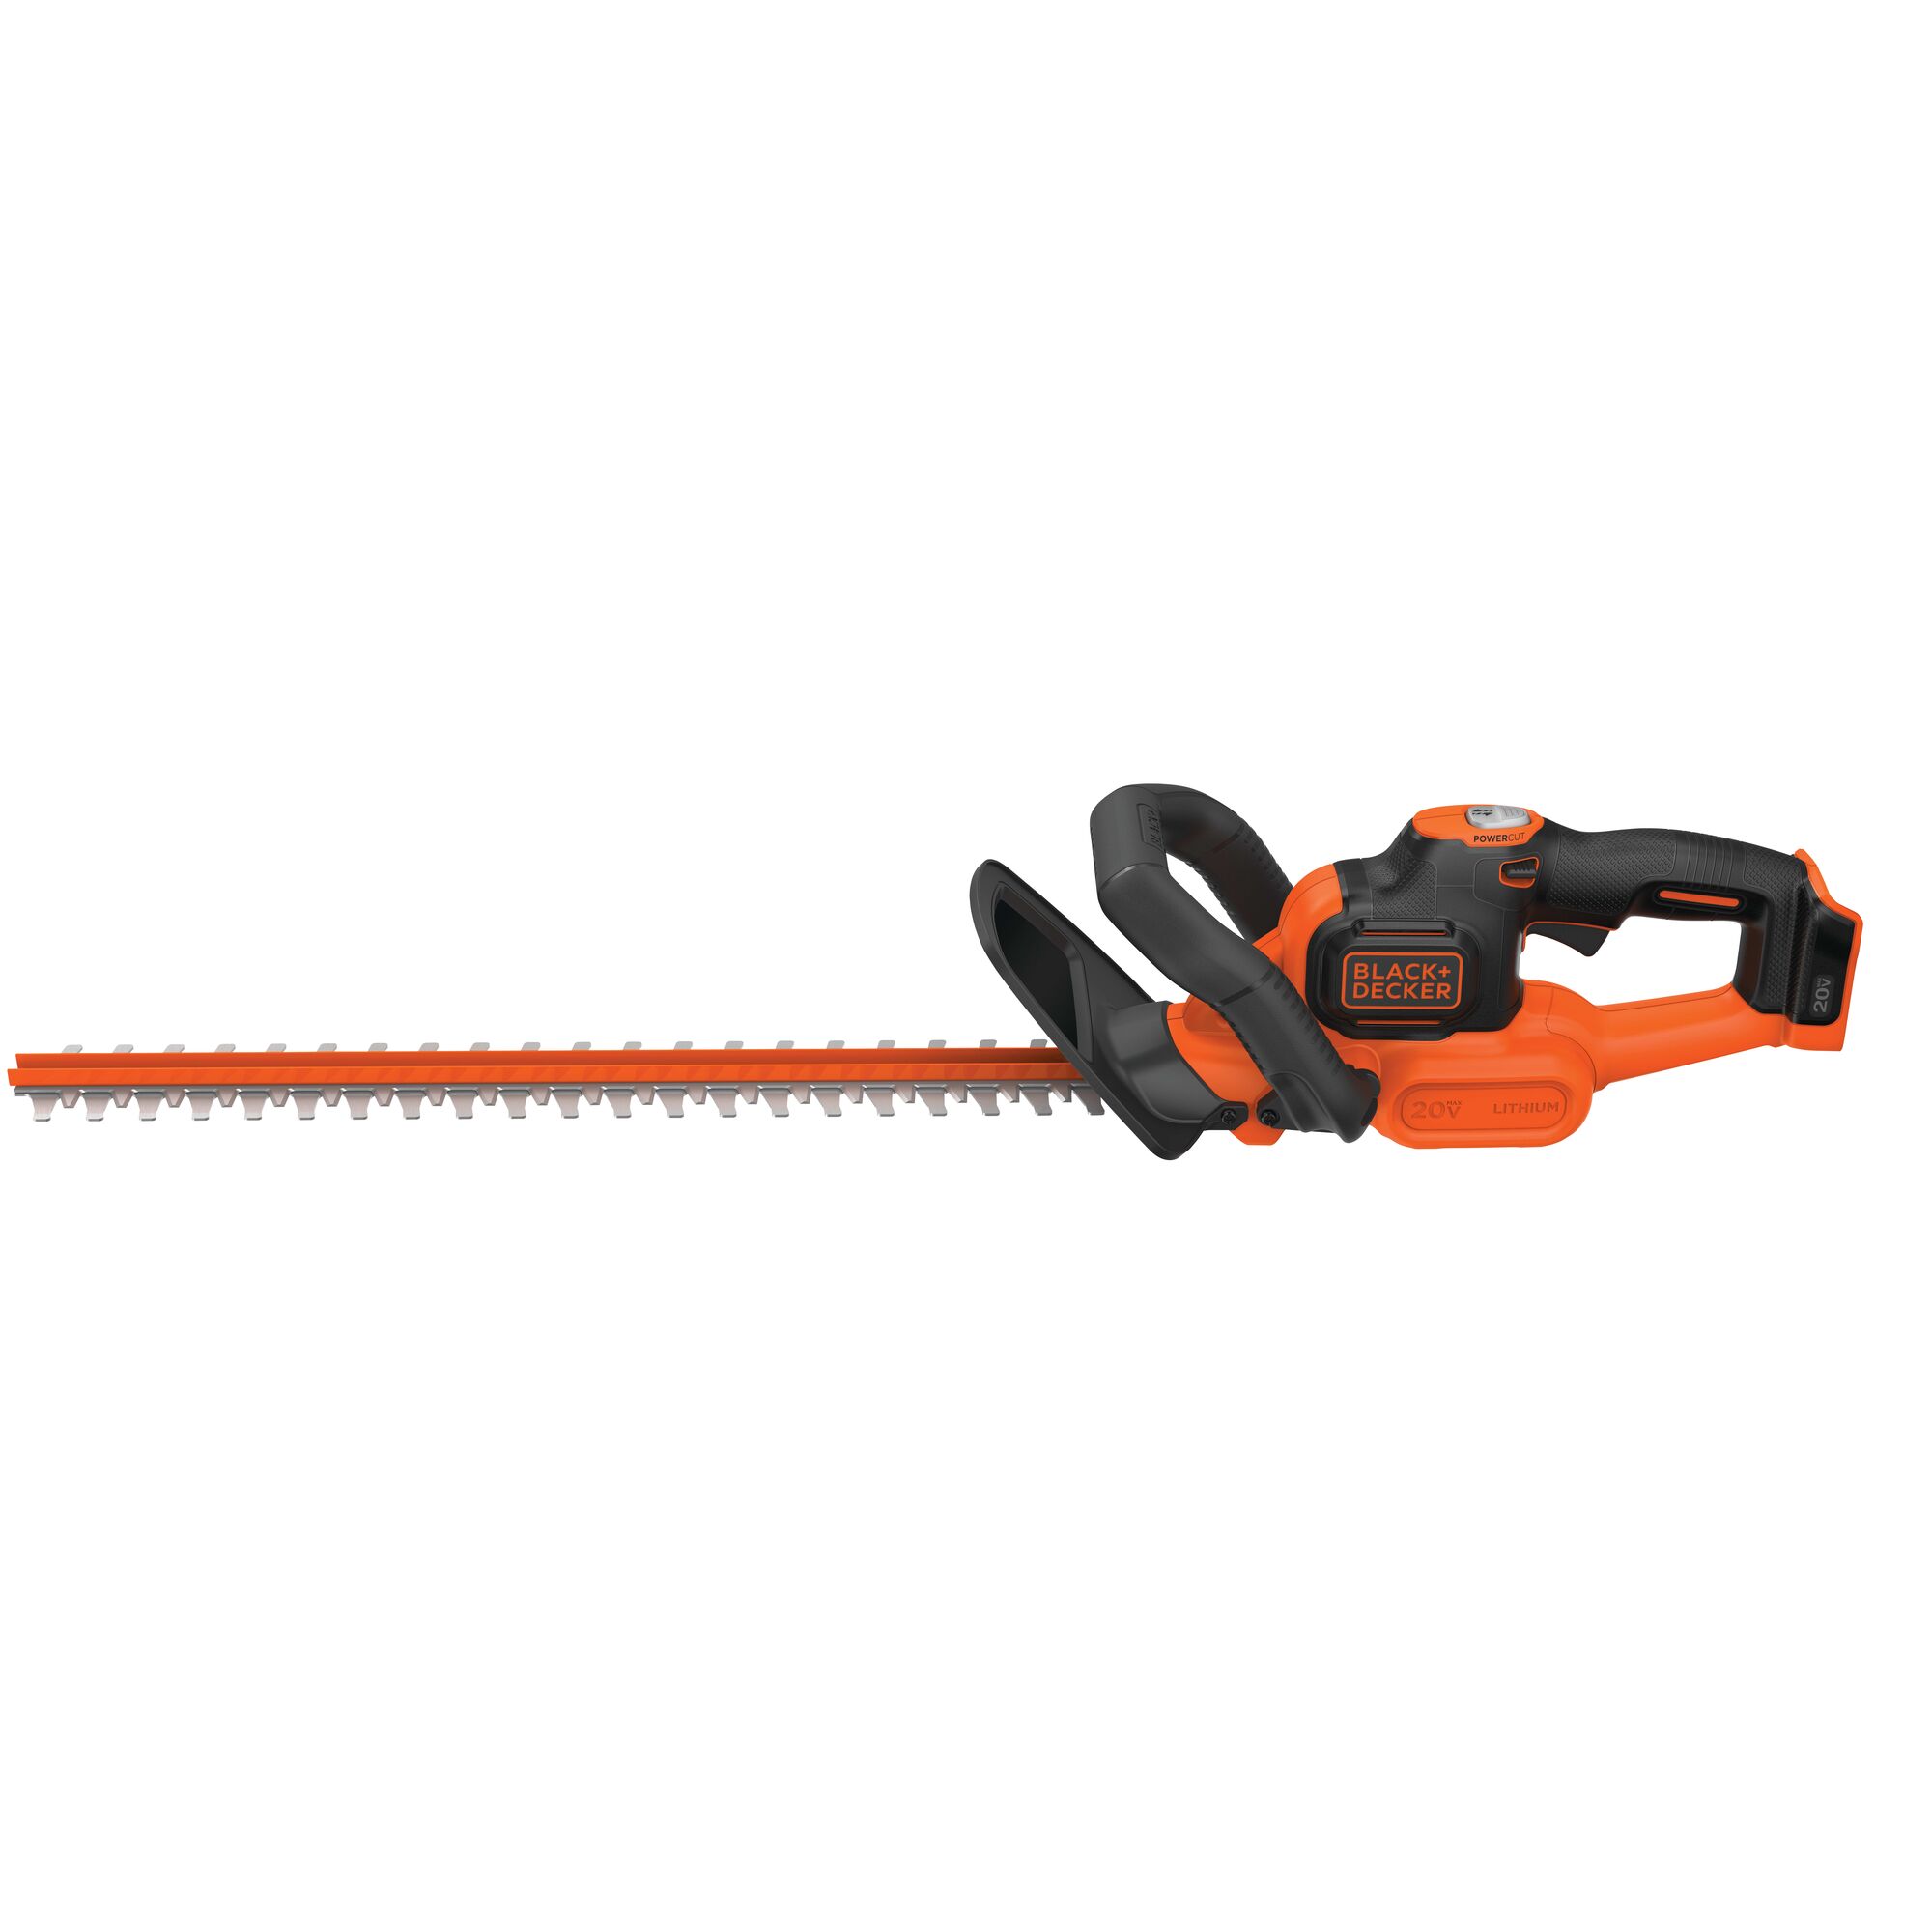 Profile of 20 Volt Max Powercut Hedge Trimmer on white background.